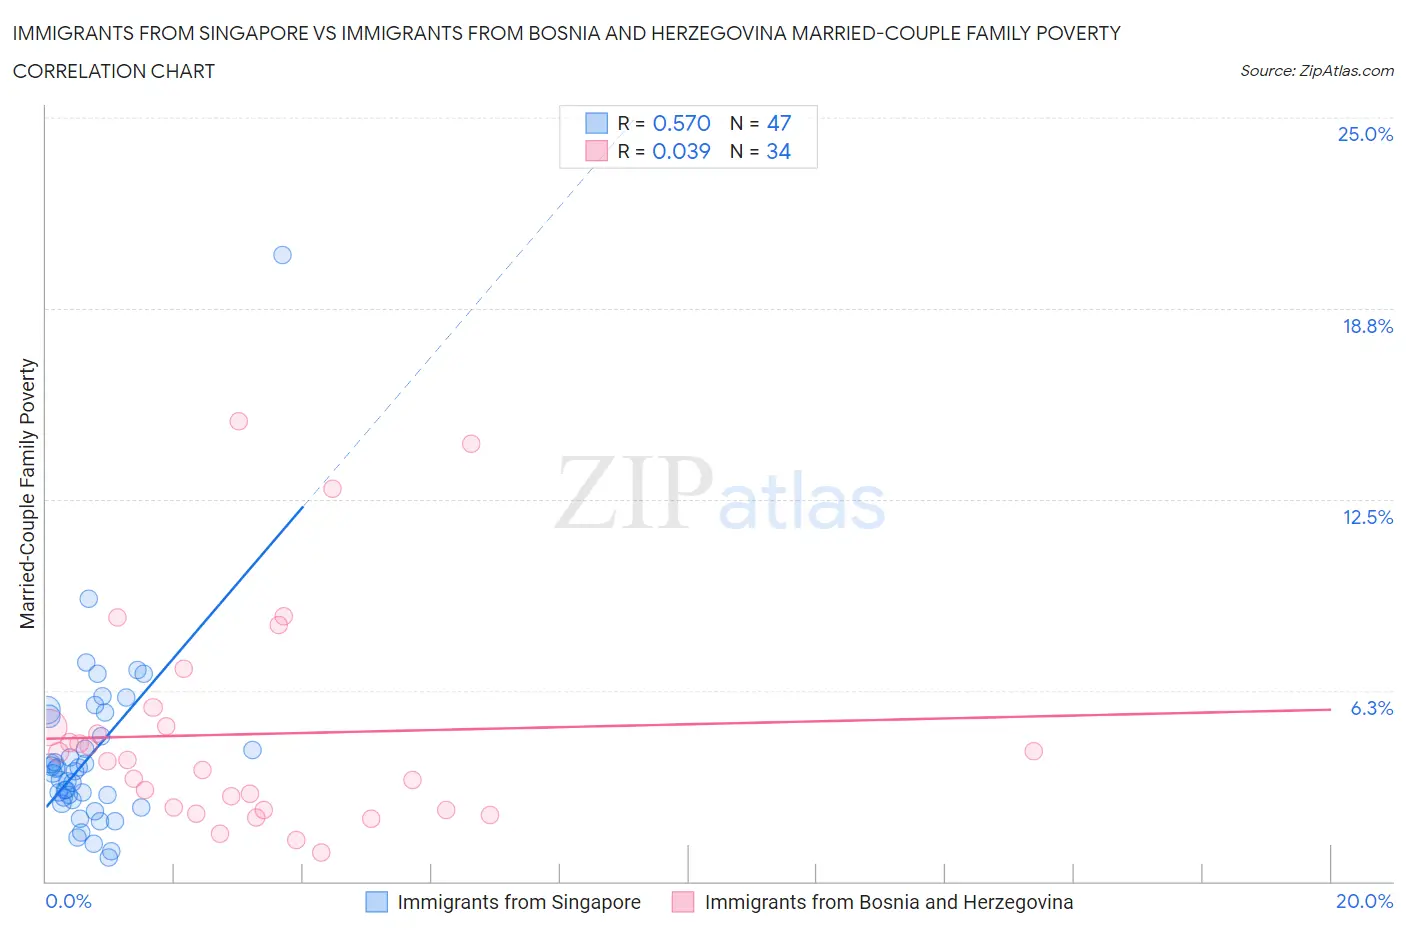 Immigrants from Singapore vs Immigrants from Bosnia and Herzegovina Married-Couple Family Poverty